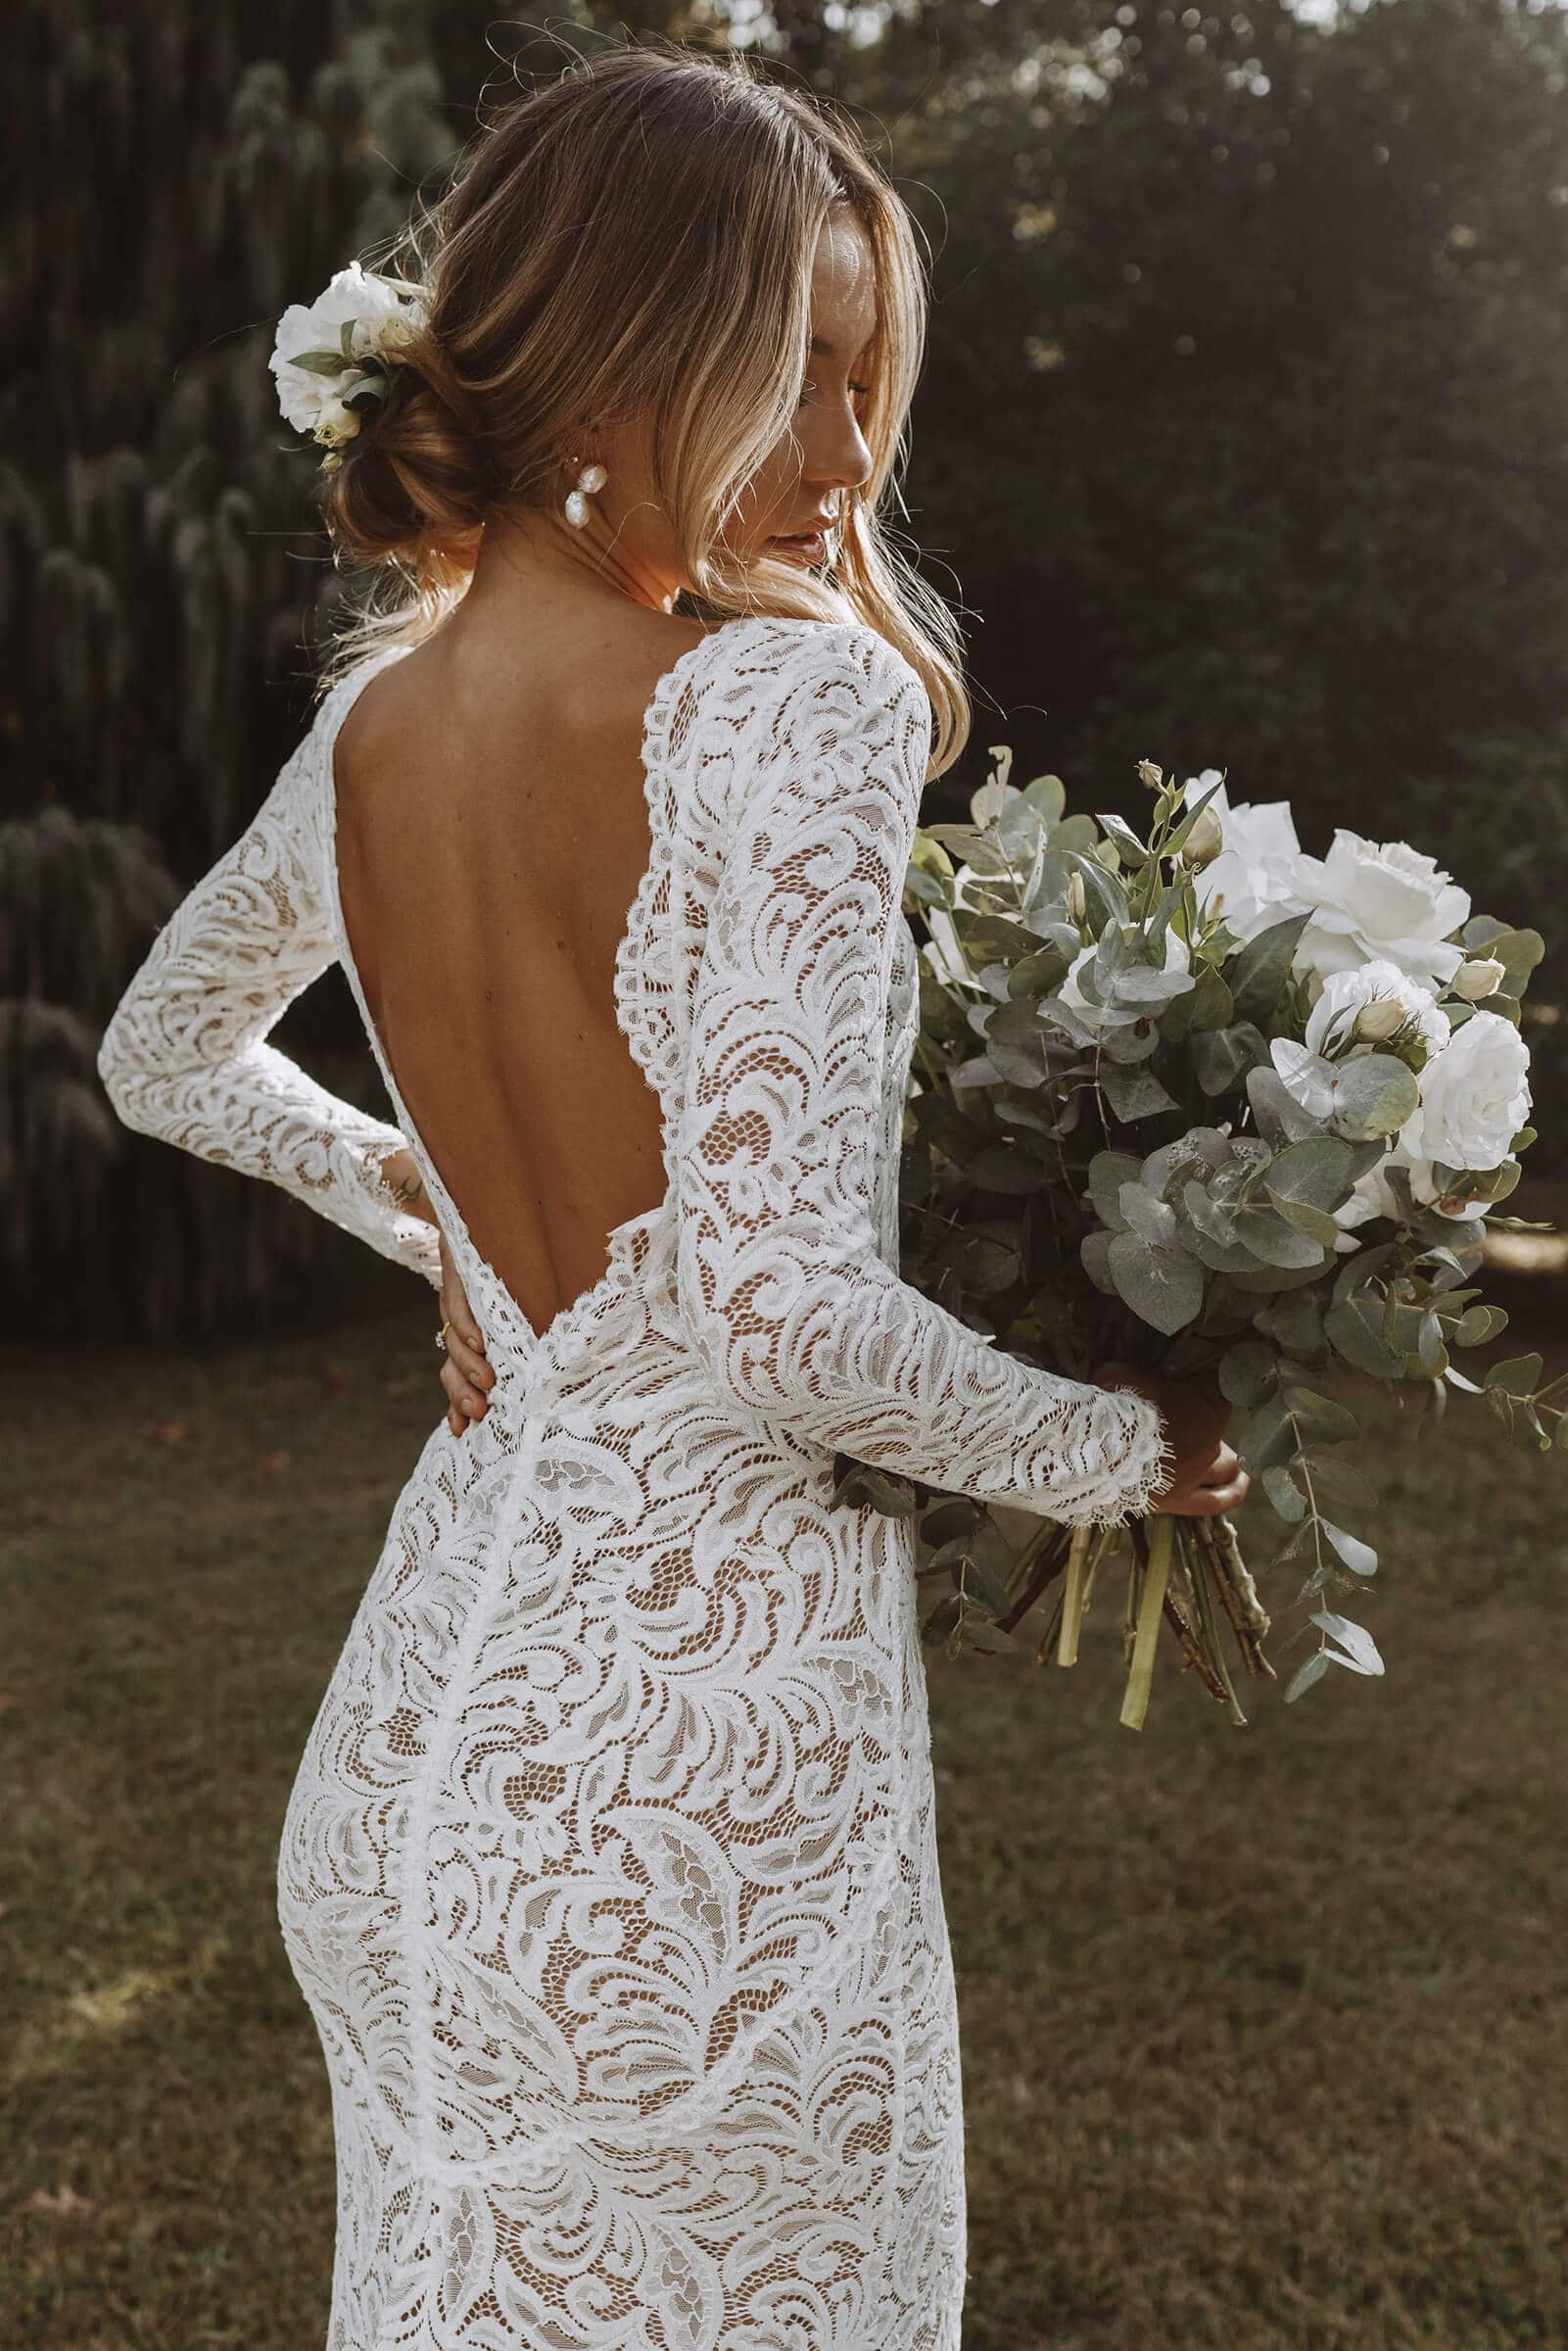 Wedding Dress Alterations And Fittings Advice - Alter Creations